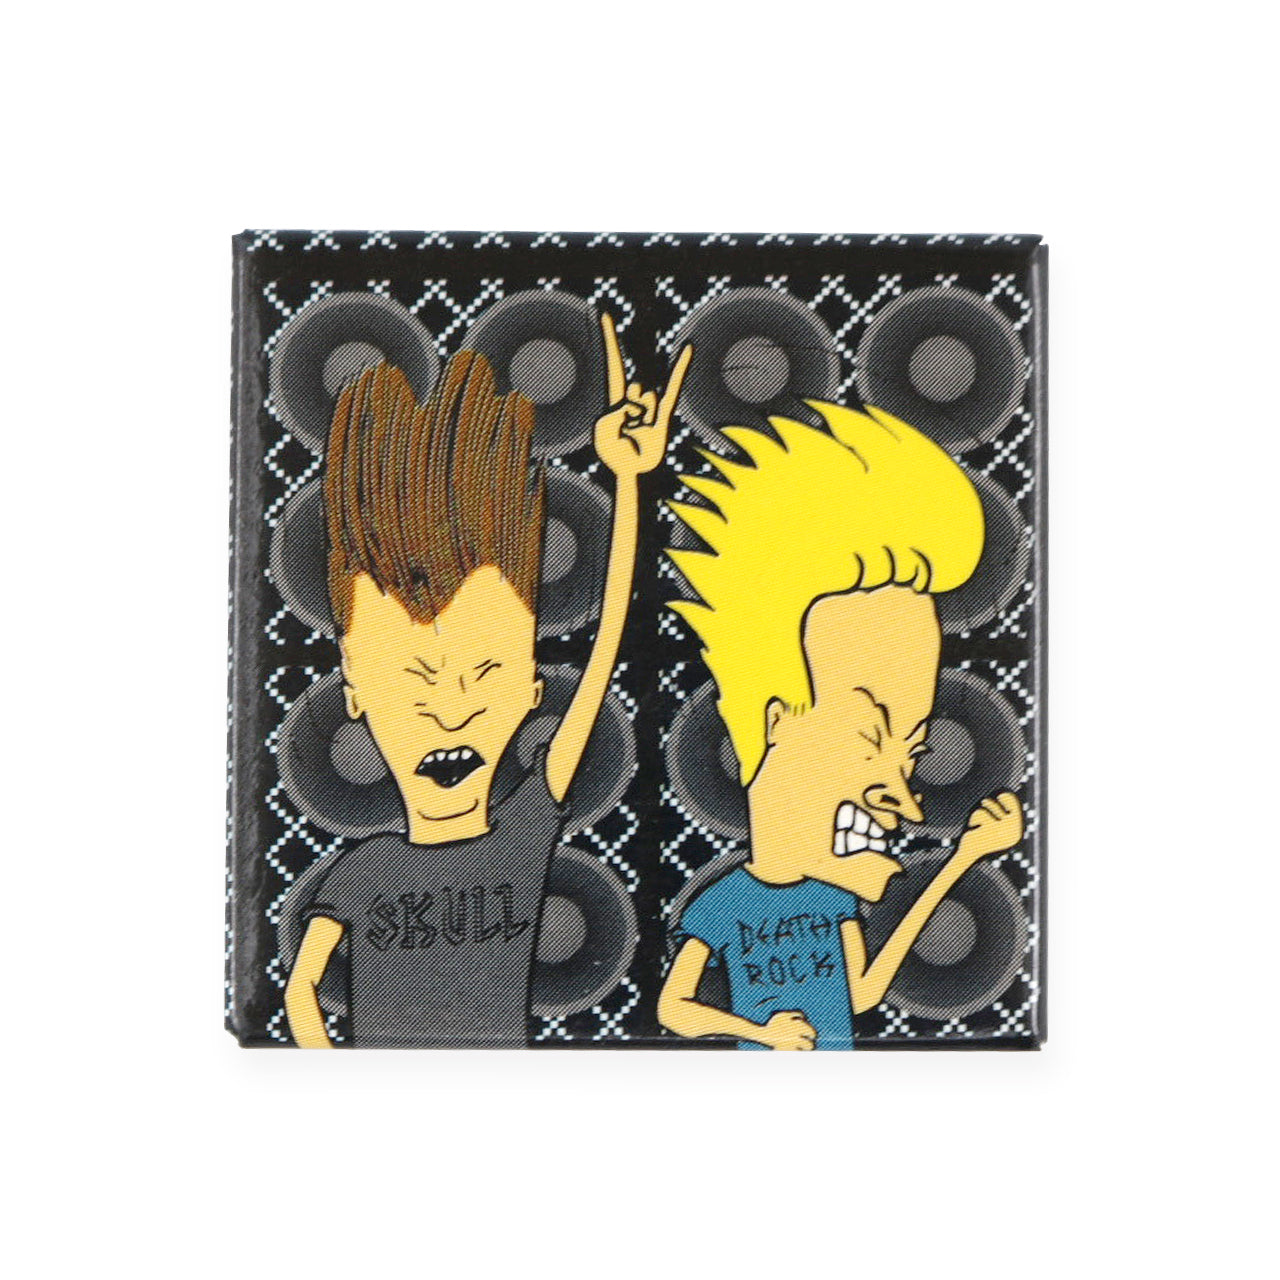 Vintage 1993 Beavis & Butthead Pinback Button by MTV.  Add a little flair to your jacket, backpack or tote with this Vintage Rock On Pinback Button!  Measures 2 inches.  Please note that due to everyone’s monitor displaying differently, the colors you see may vary.